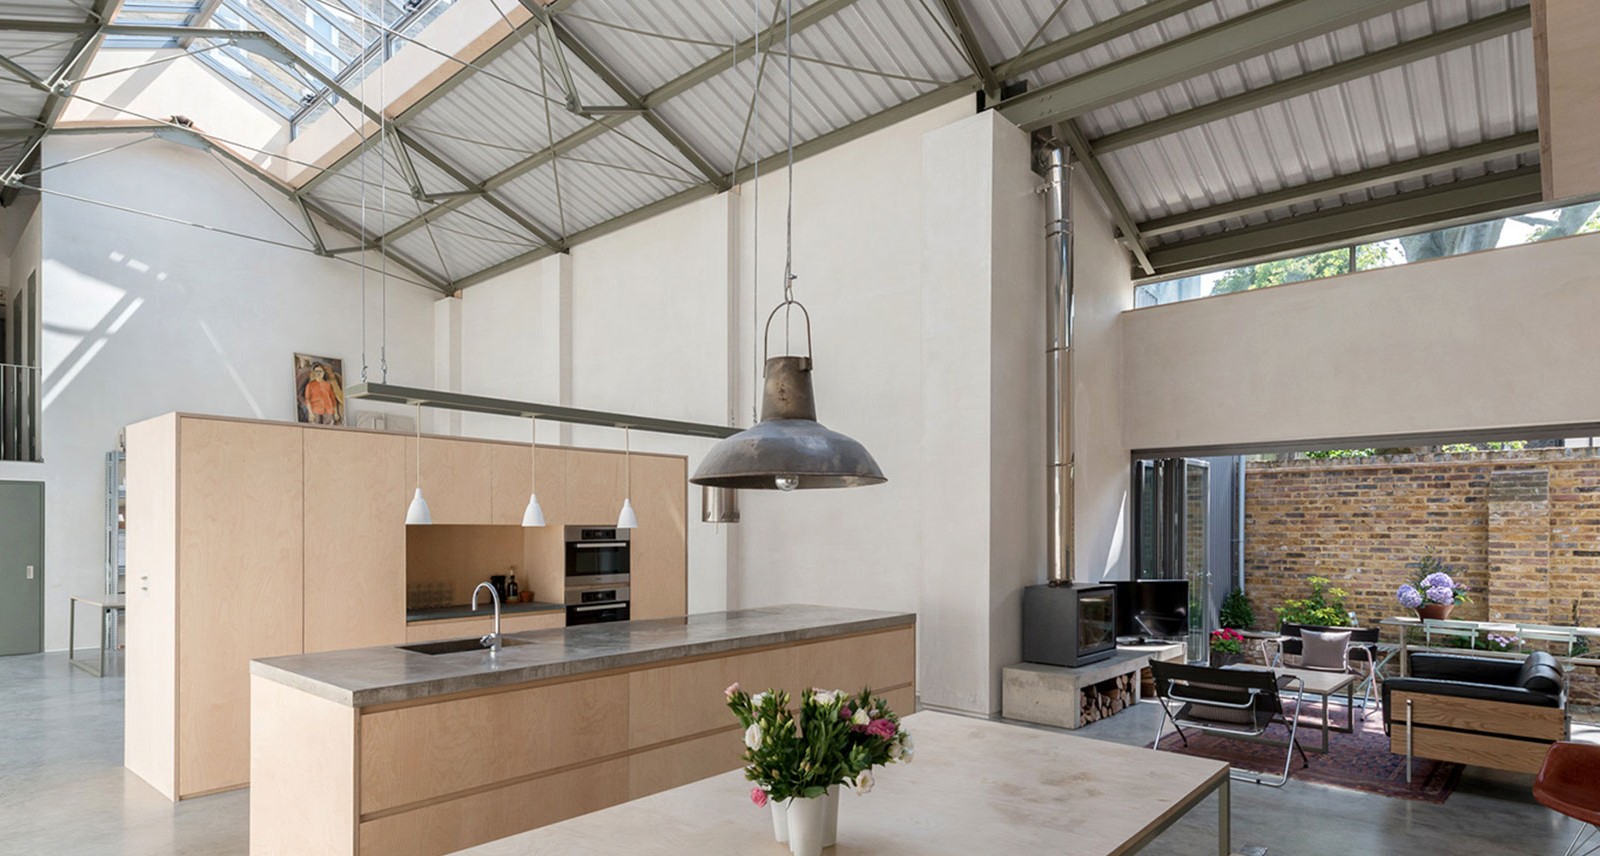 This Warehouse-Like Space Is Open Concept Living at Its Finest | Sharp ...